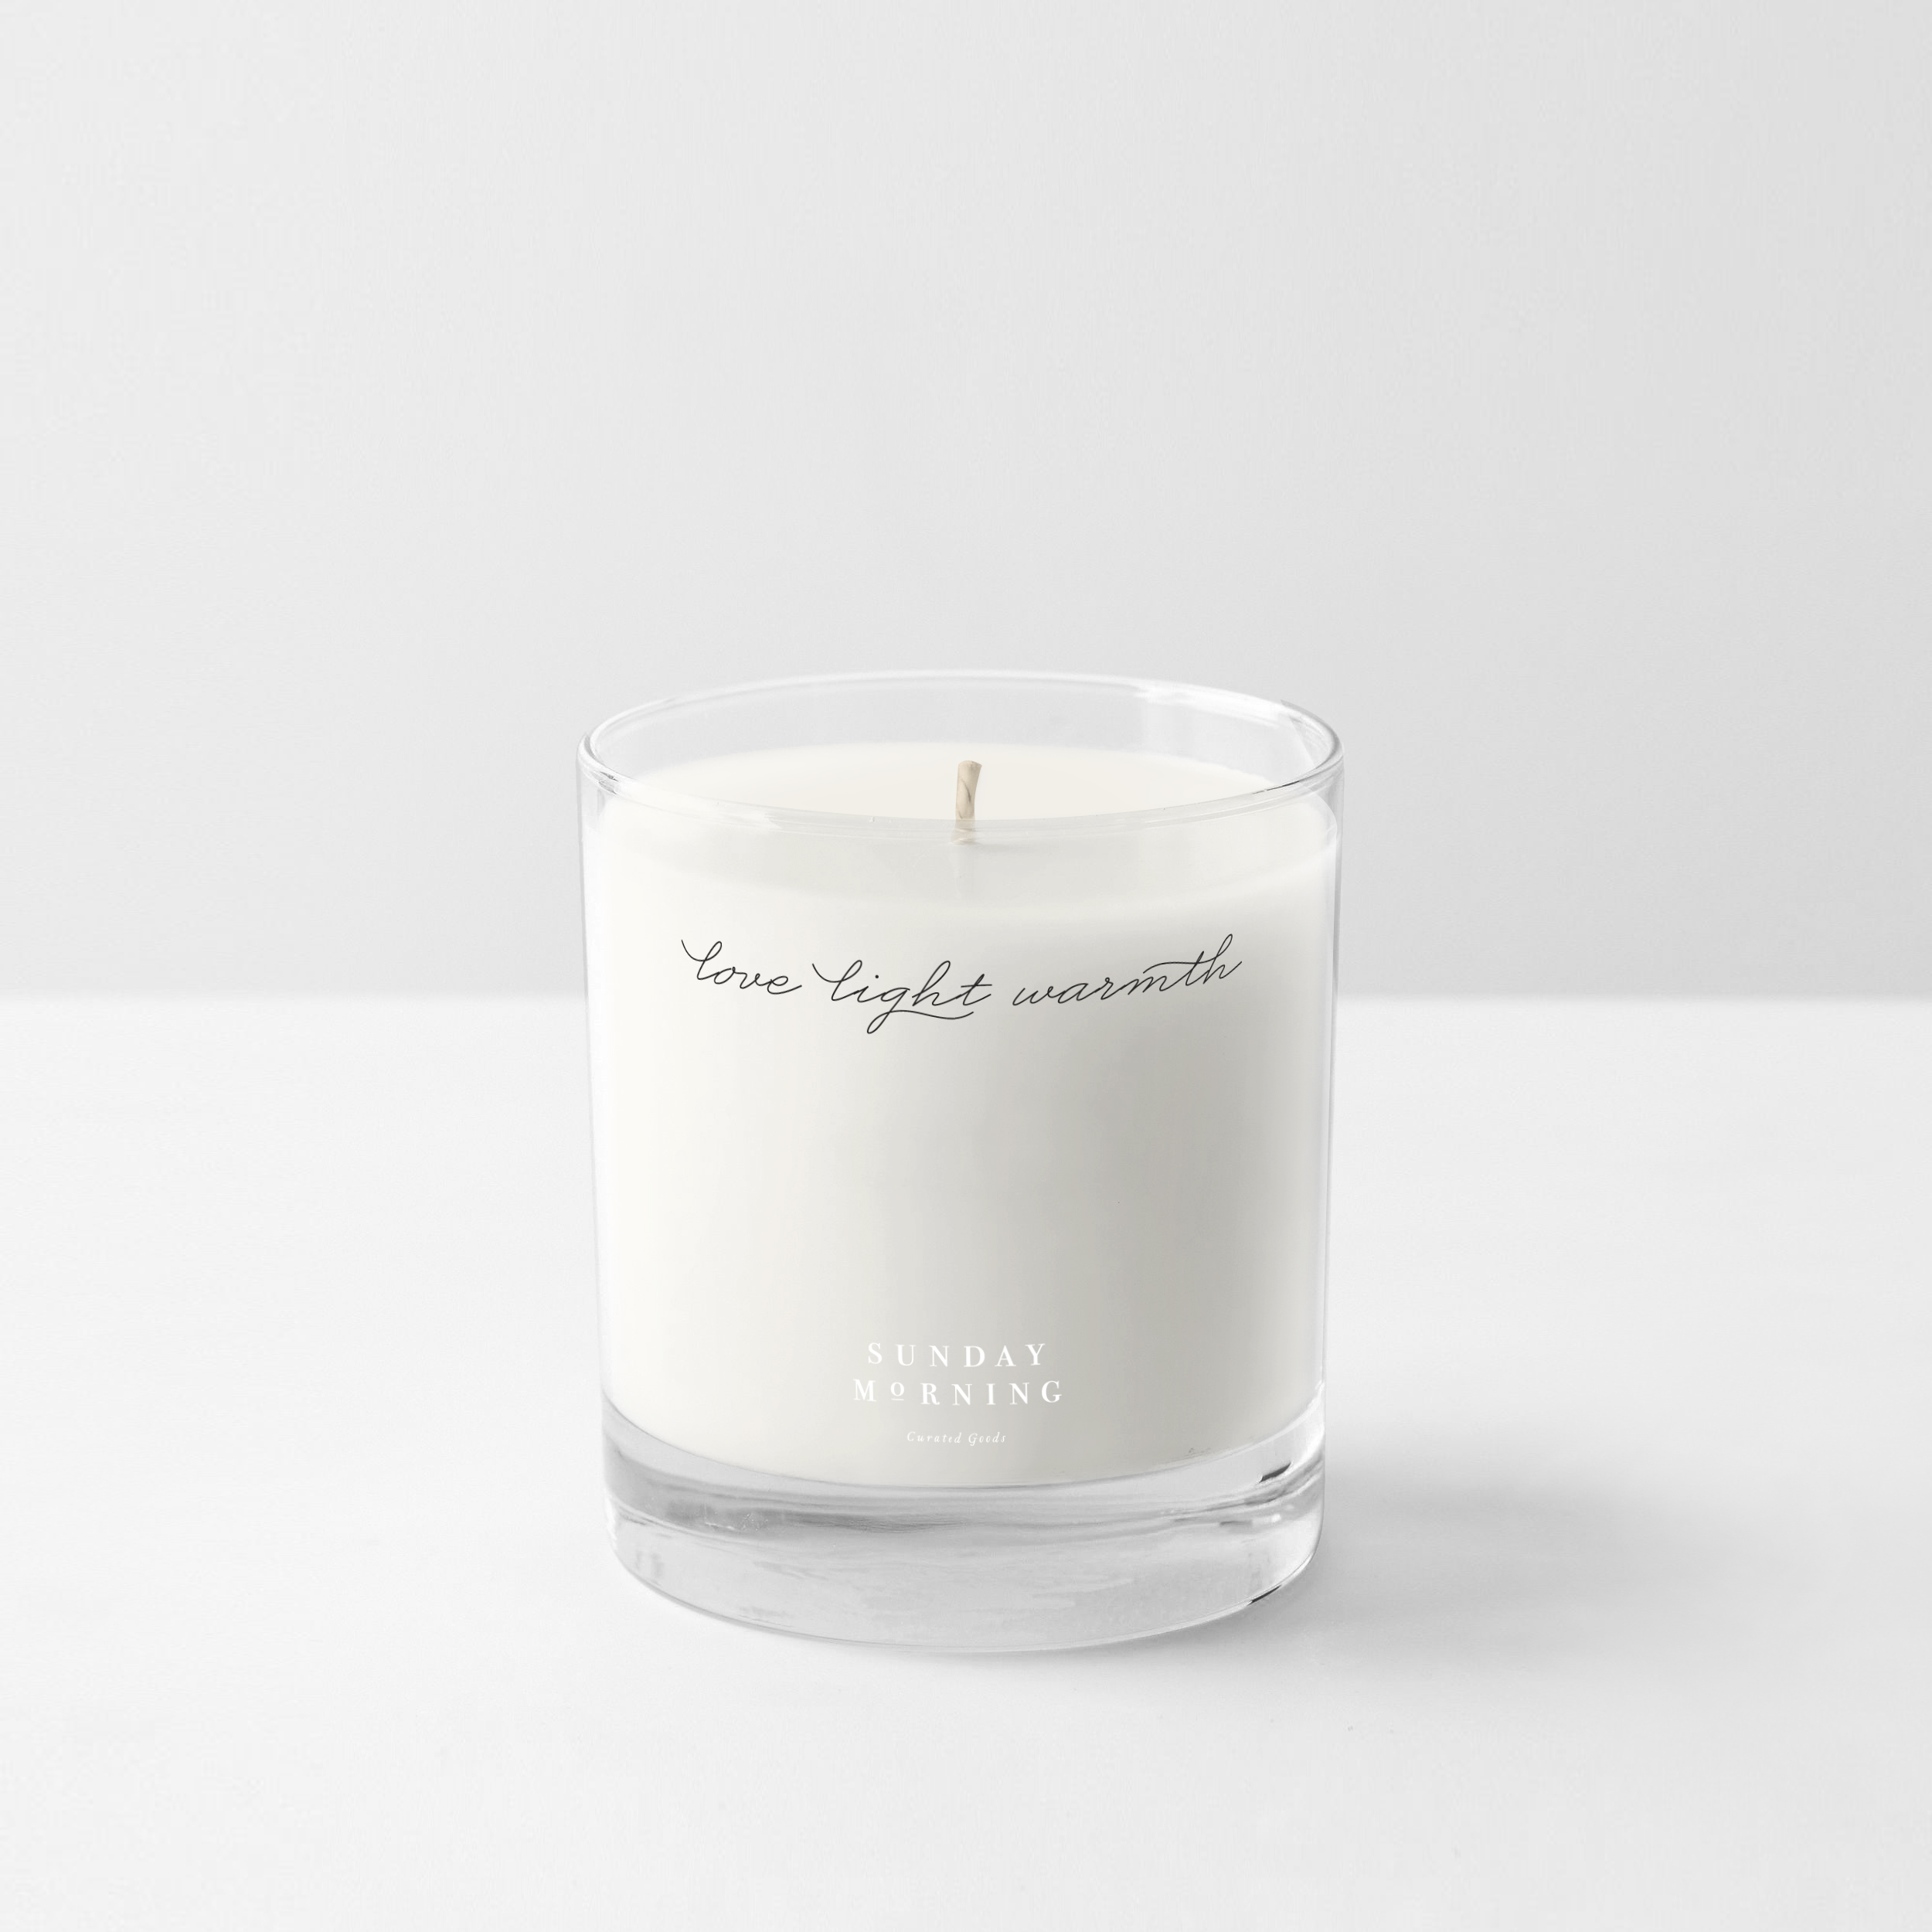 Peggy Wong Studio / candle packaging design for Sunday Morning